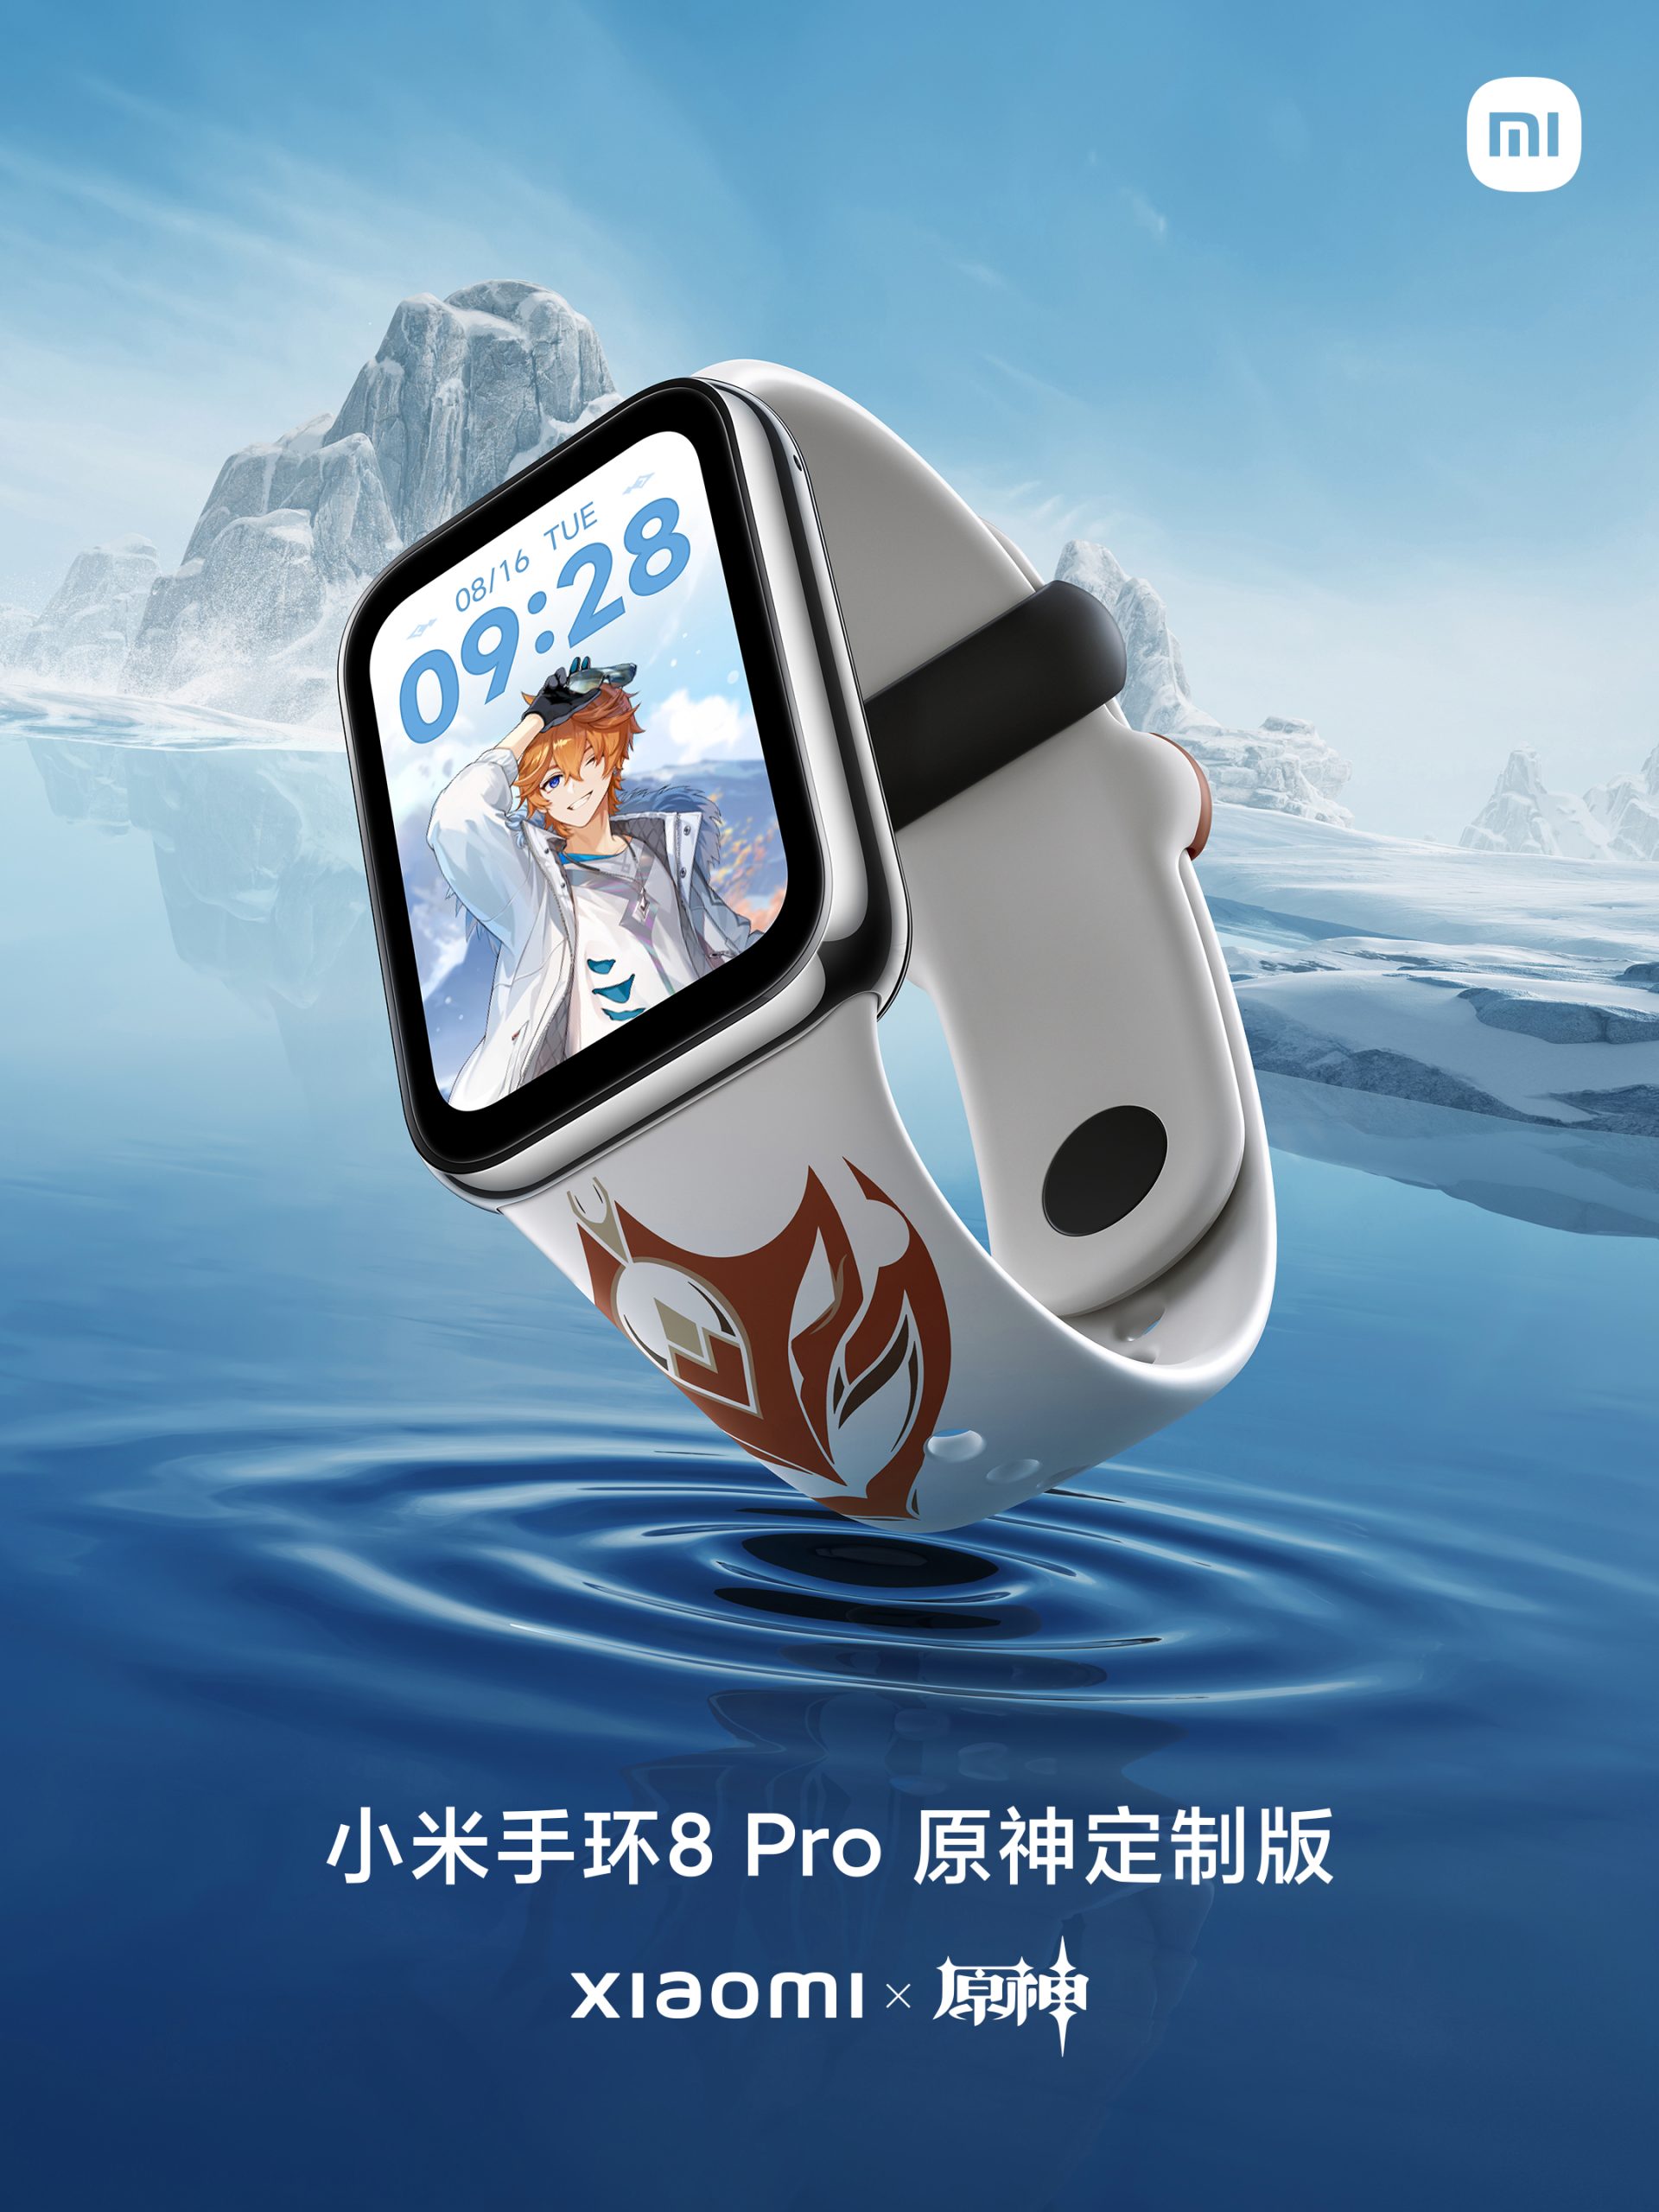 Xiaomi Band 8 Pro Genshin Impact special edition launches in China